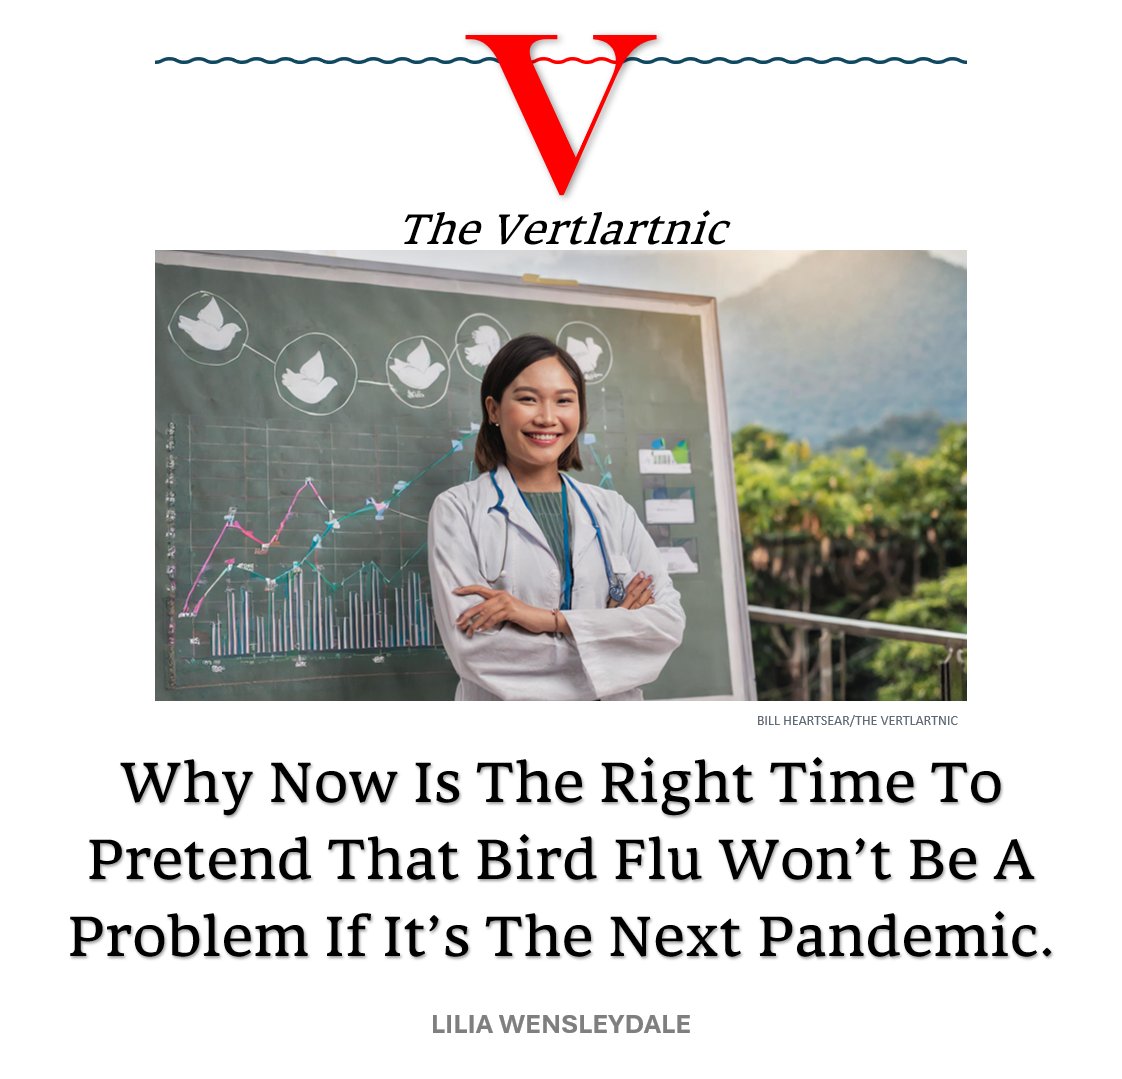 Why Now Is The Right Time To Pretend That Bird Flu Won’t Be A Problem If It’s The Next Pandemic.